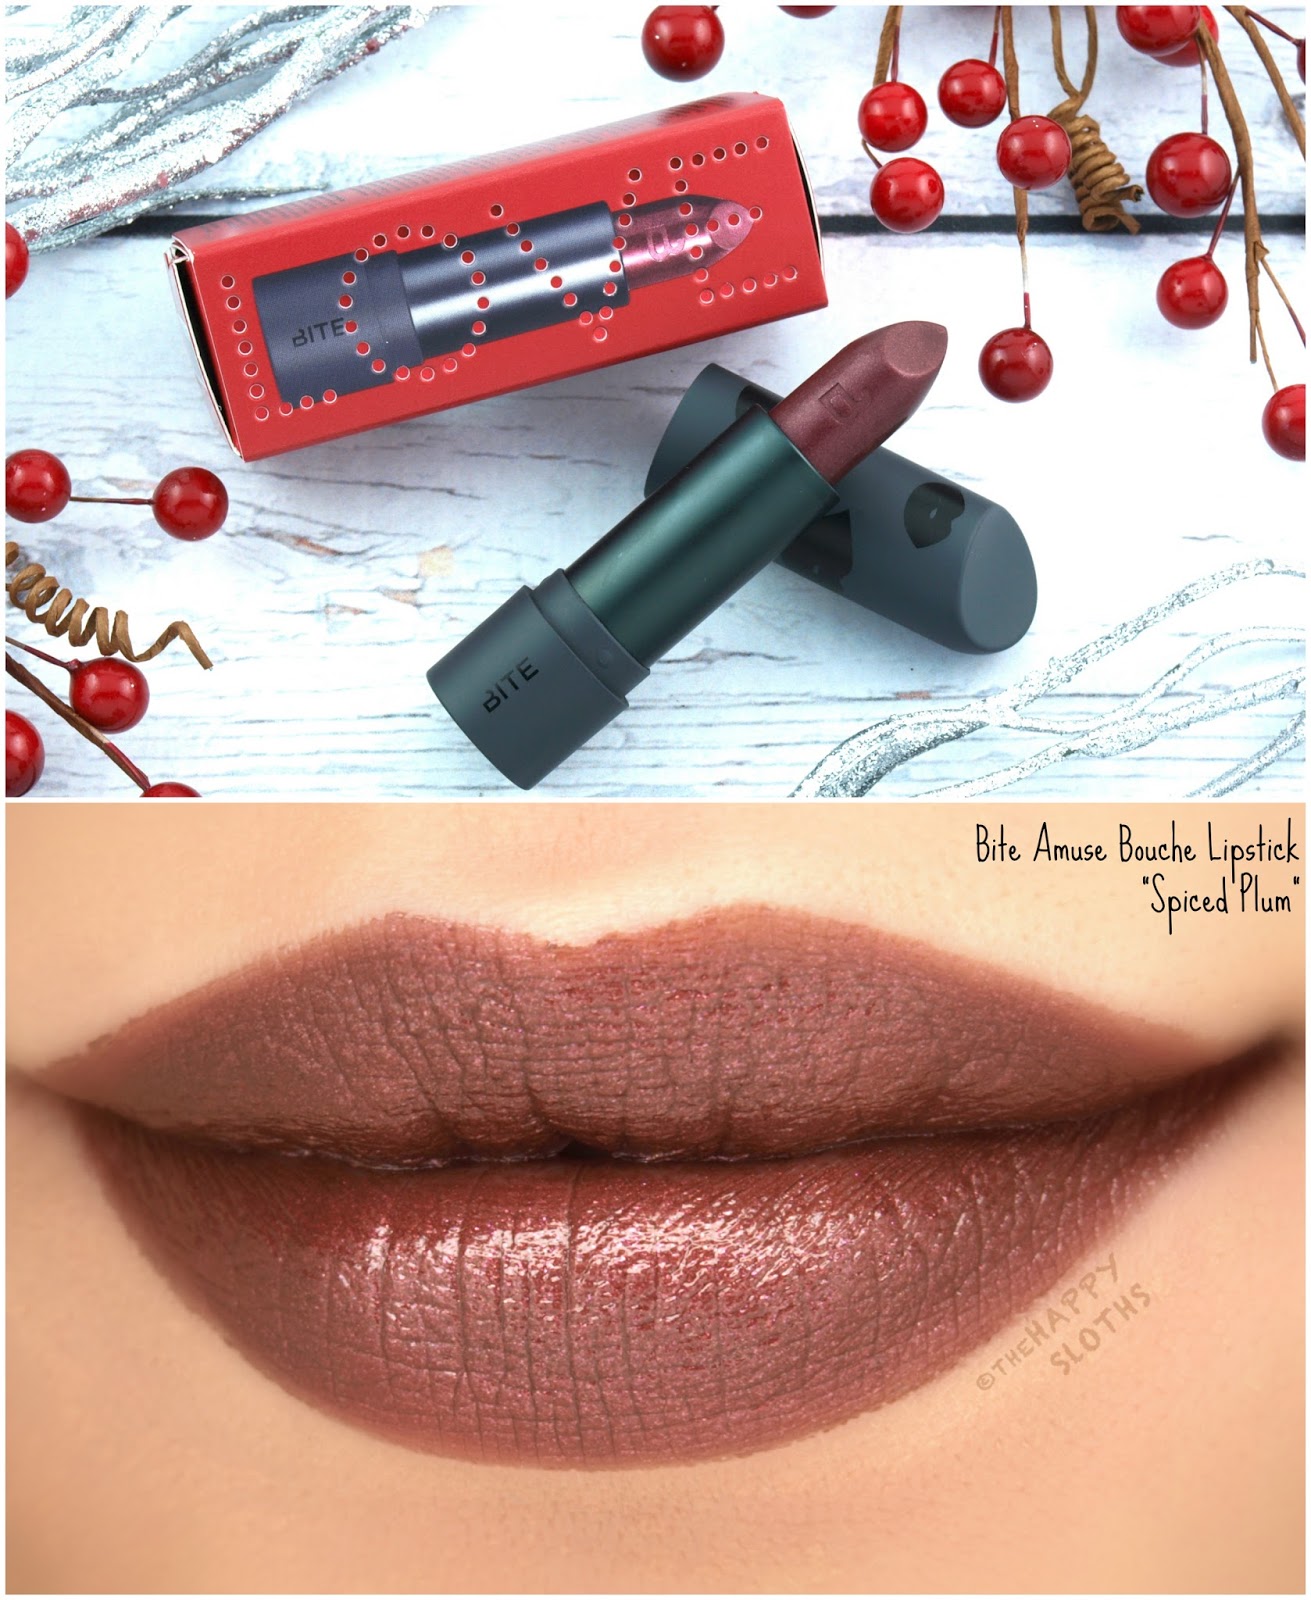 Bite Beauty Holiday 2017 | Amuse Bouche Lipstick in "Spiced Plum": Review and Swatches